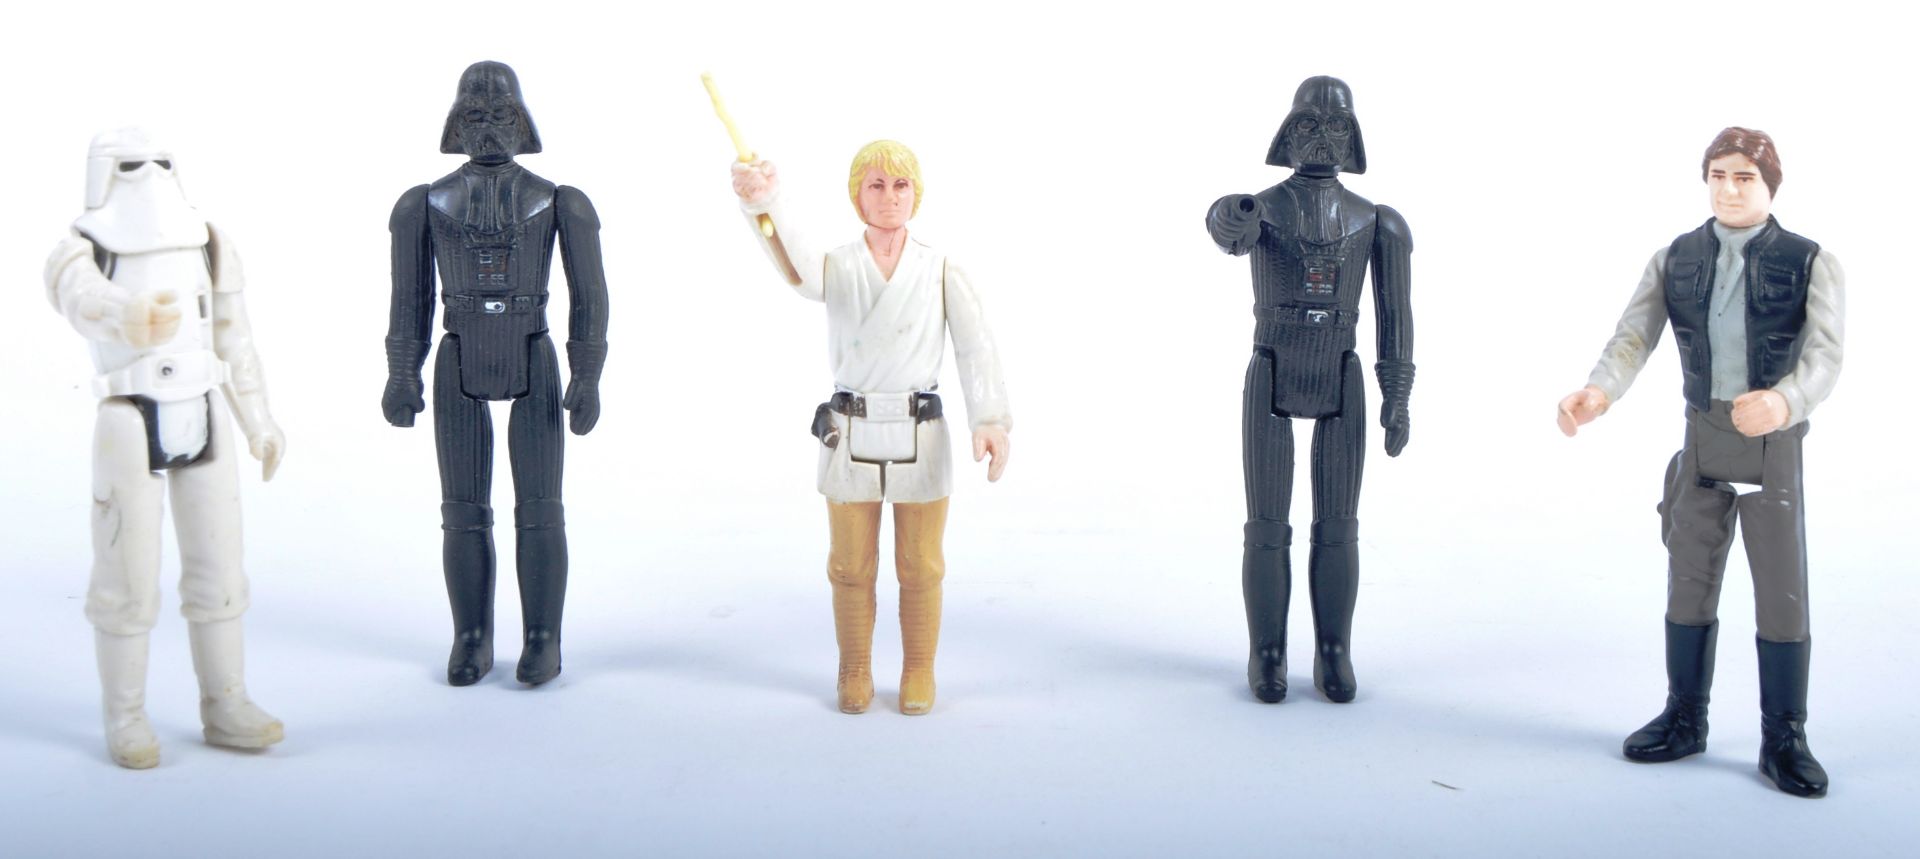 COLLECTION OF ORIGINAL MALITOY / KENNER STARWARS FIGURES